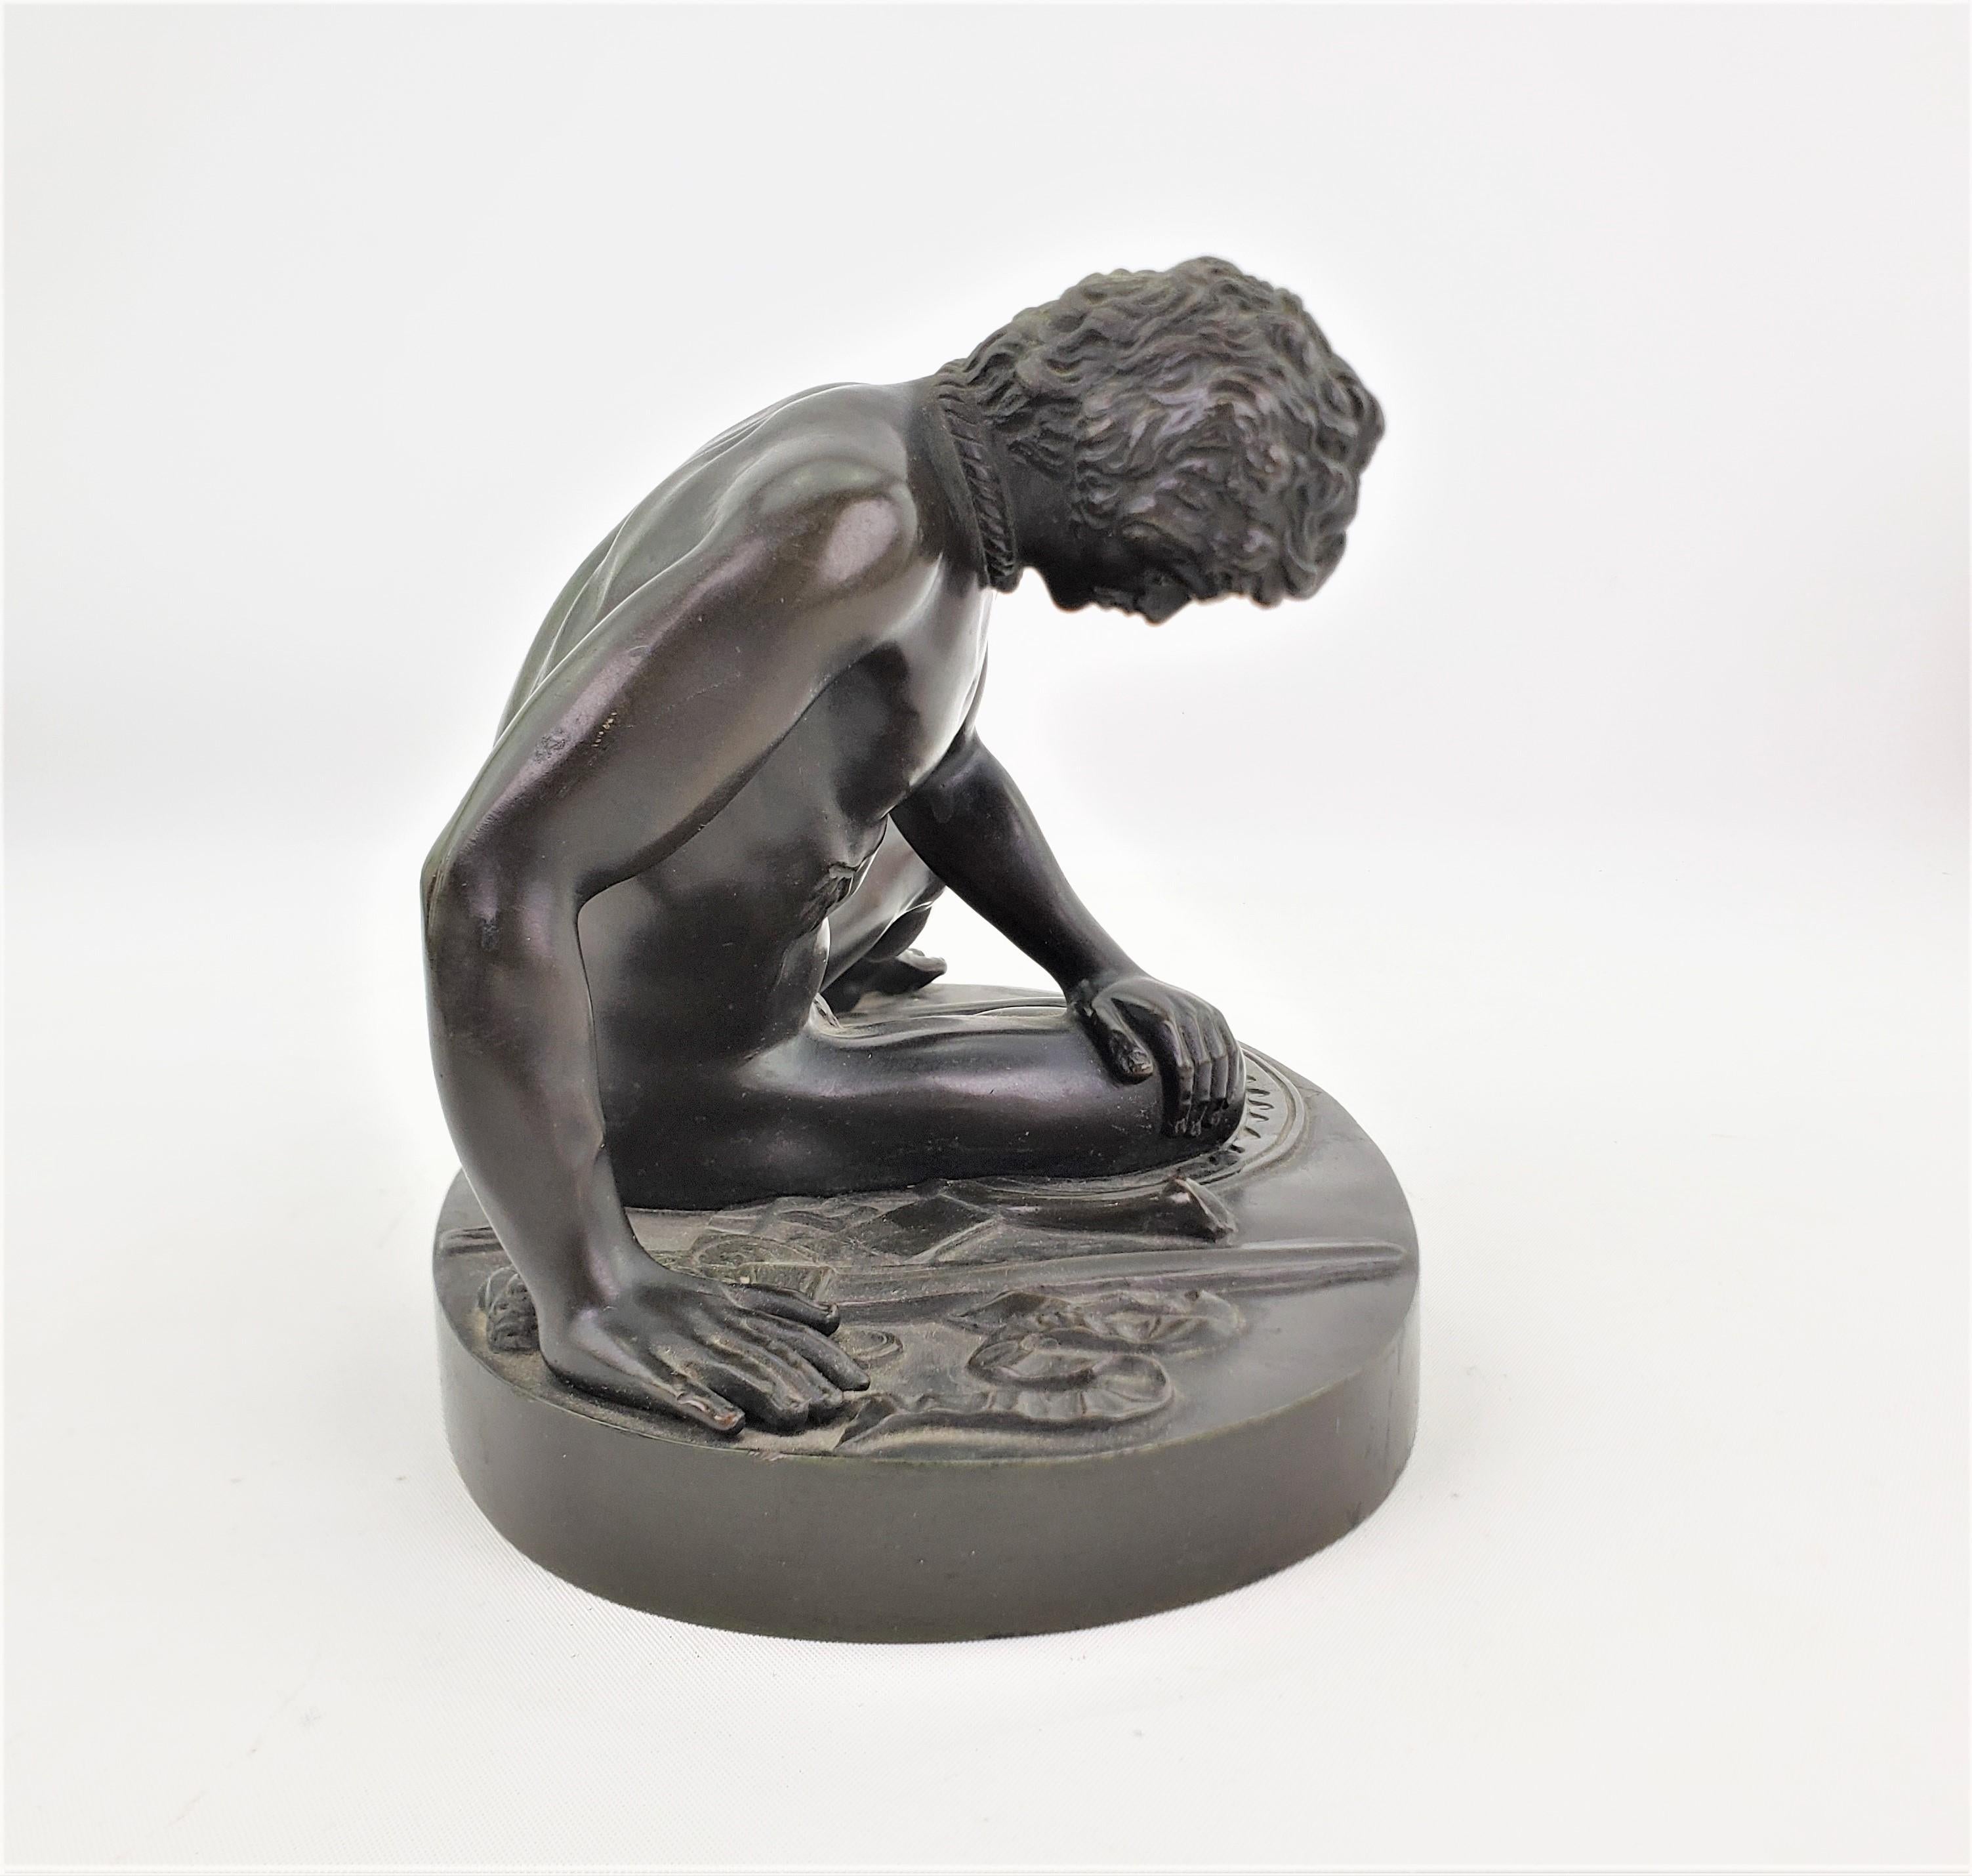 Antique Grand Tour Ornately Cast 'The Dying Gaul' Italian Bronze Sculpture In Good Condition For Sale In Hamilton, Ontario